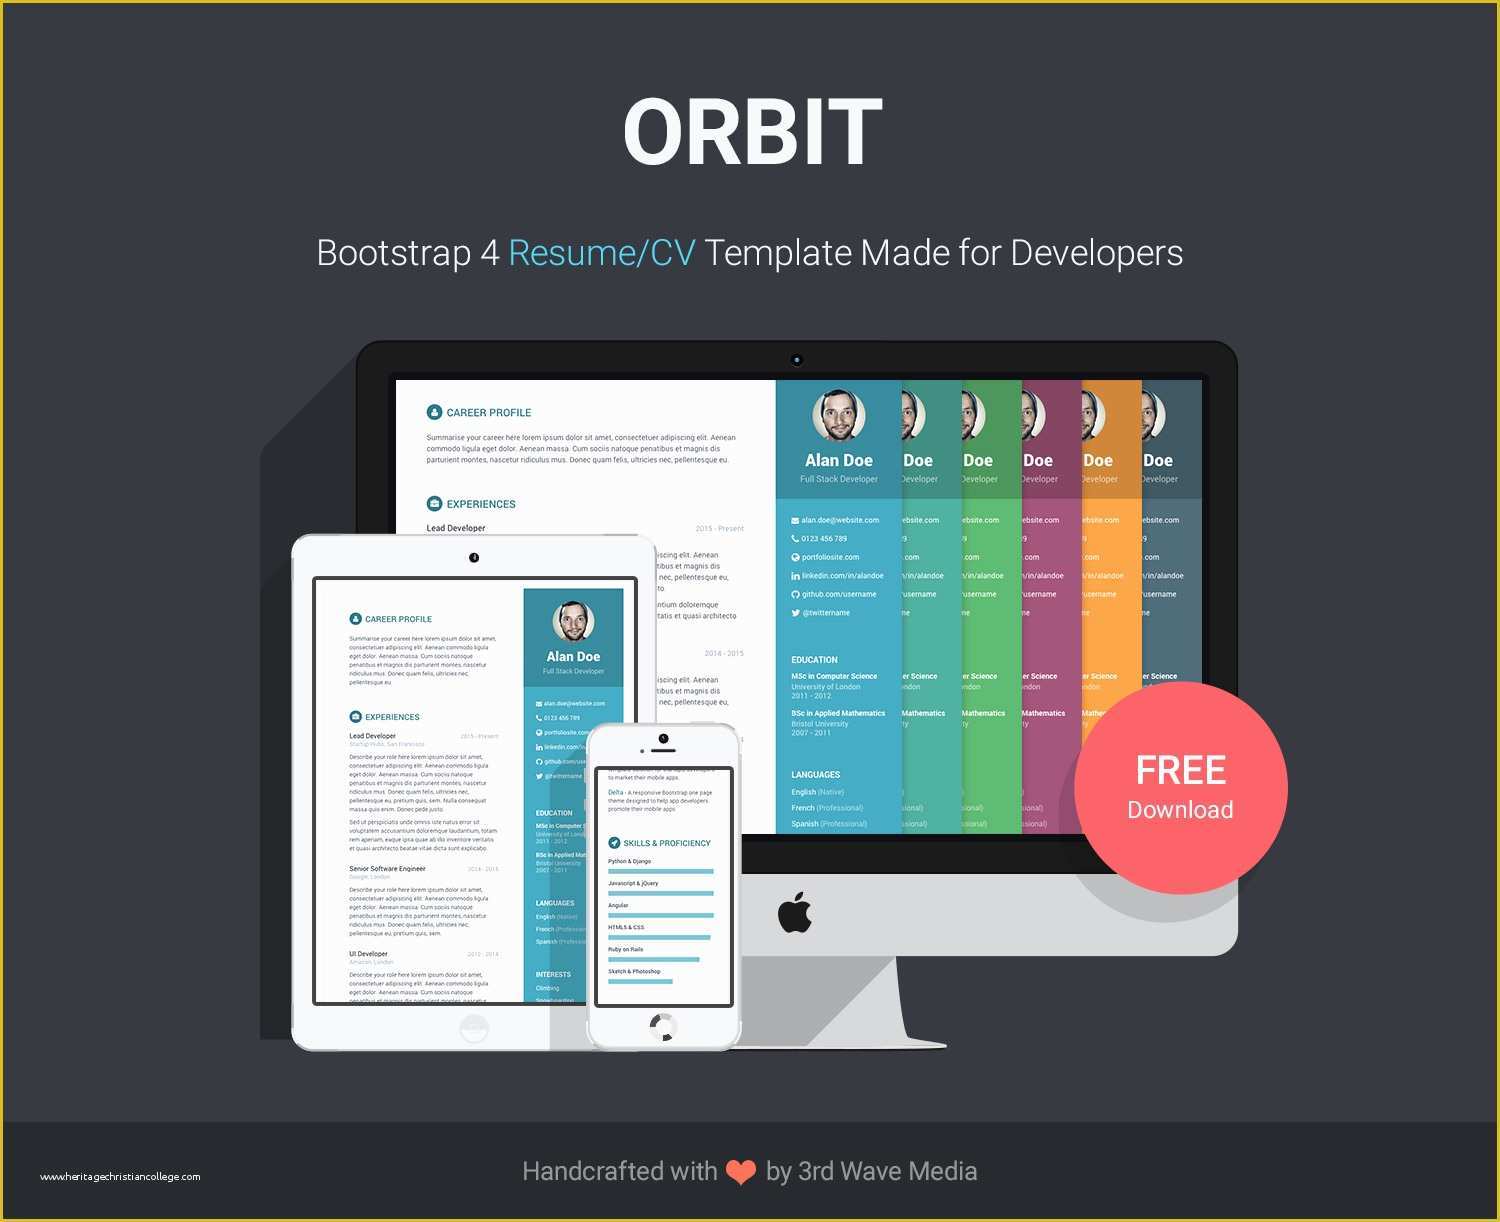 Construction Website Templates HTML5 Free Download Of Free Bootstrap Resume Cv Template for Developers orbit